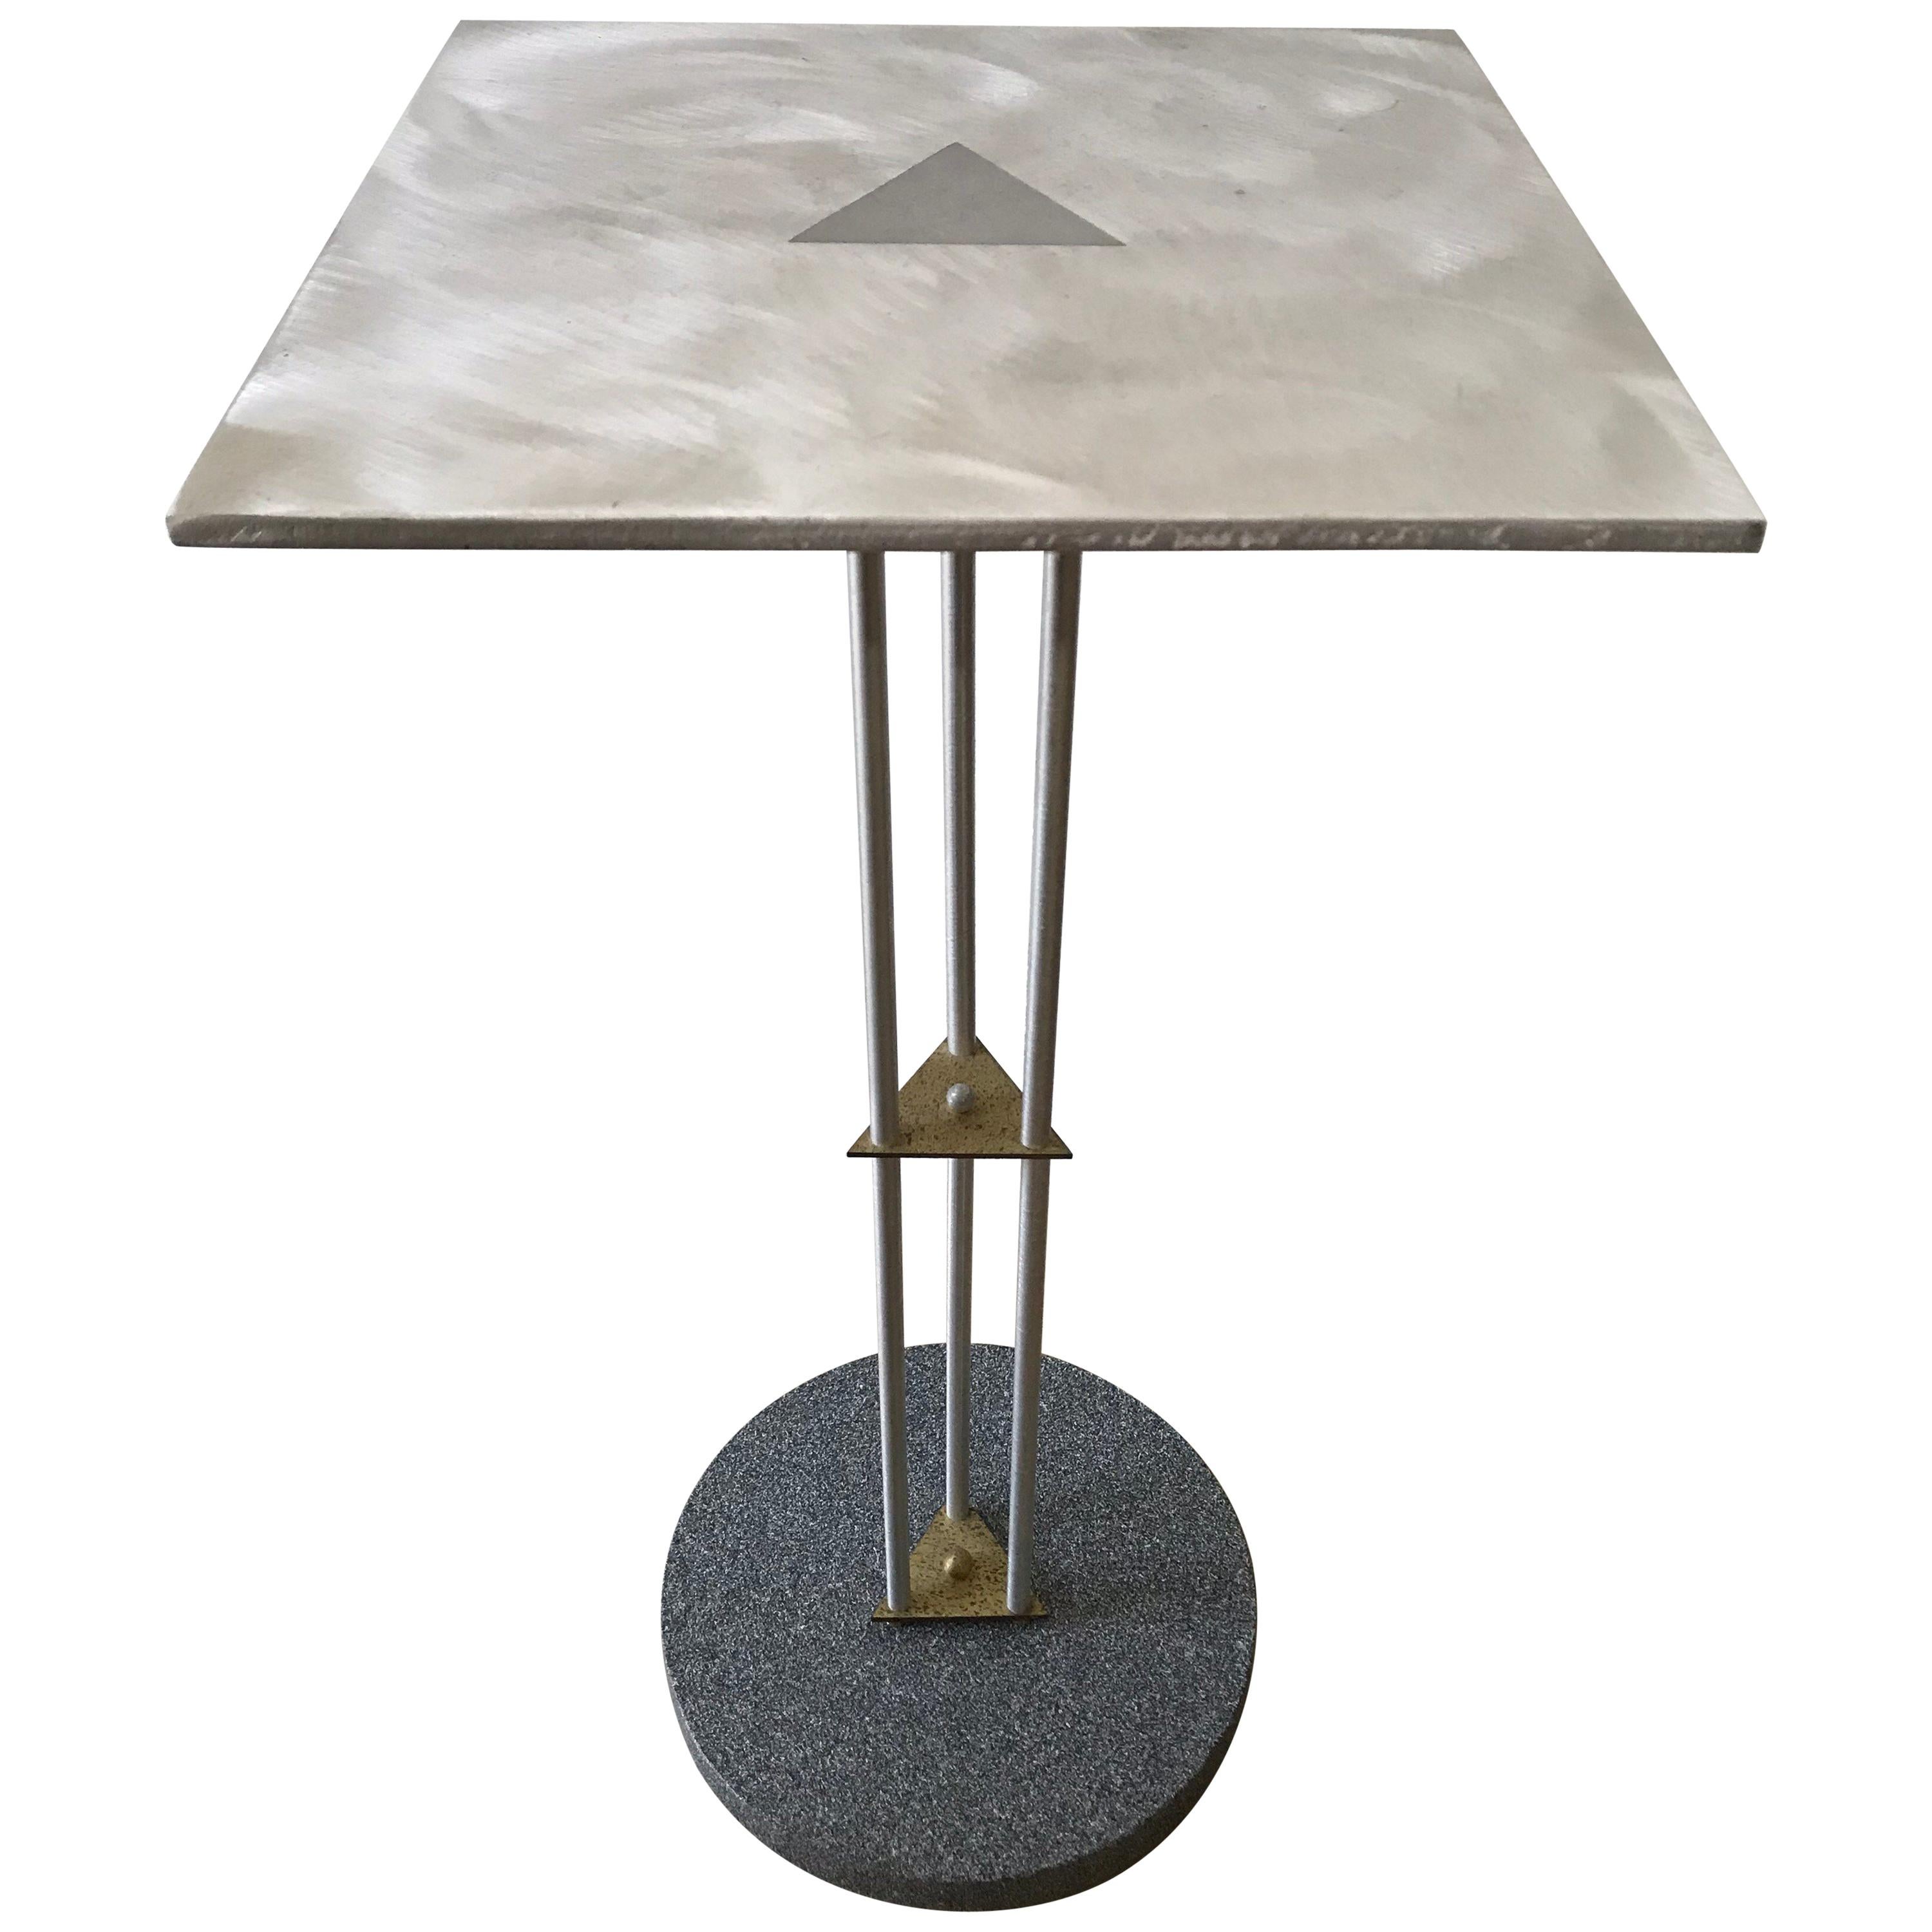 Postmodern Telephone Accent Occasional Side or End Table in Steel and Brass